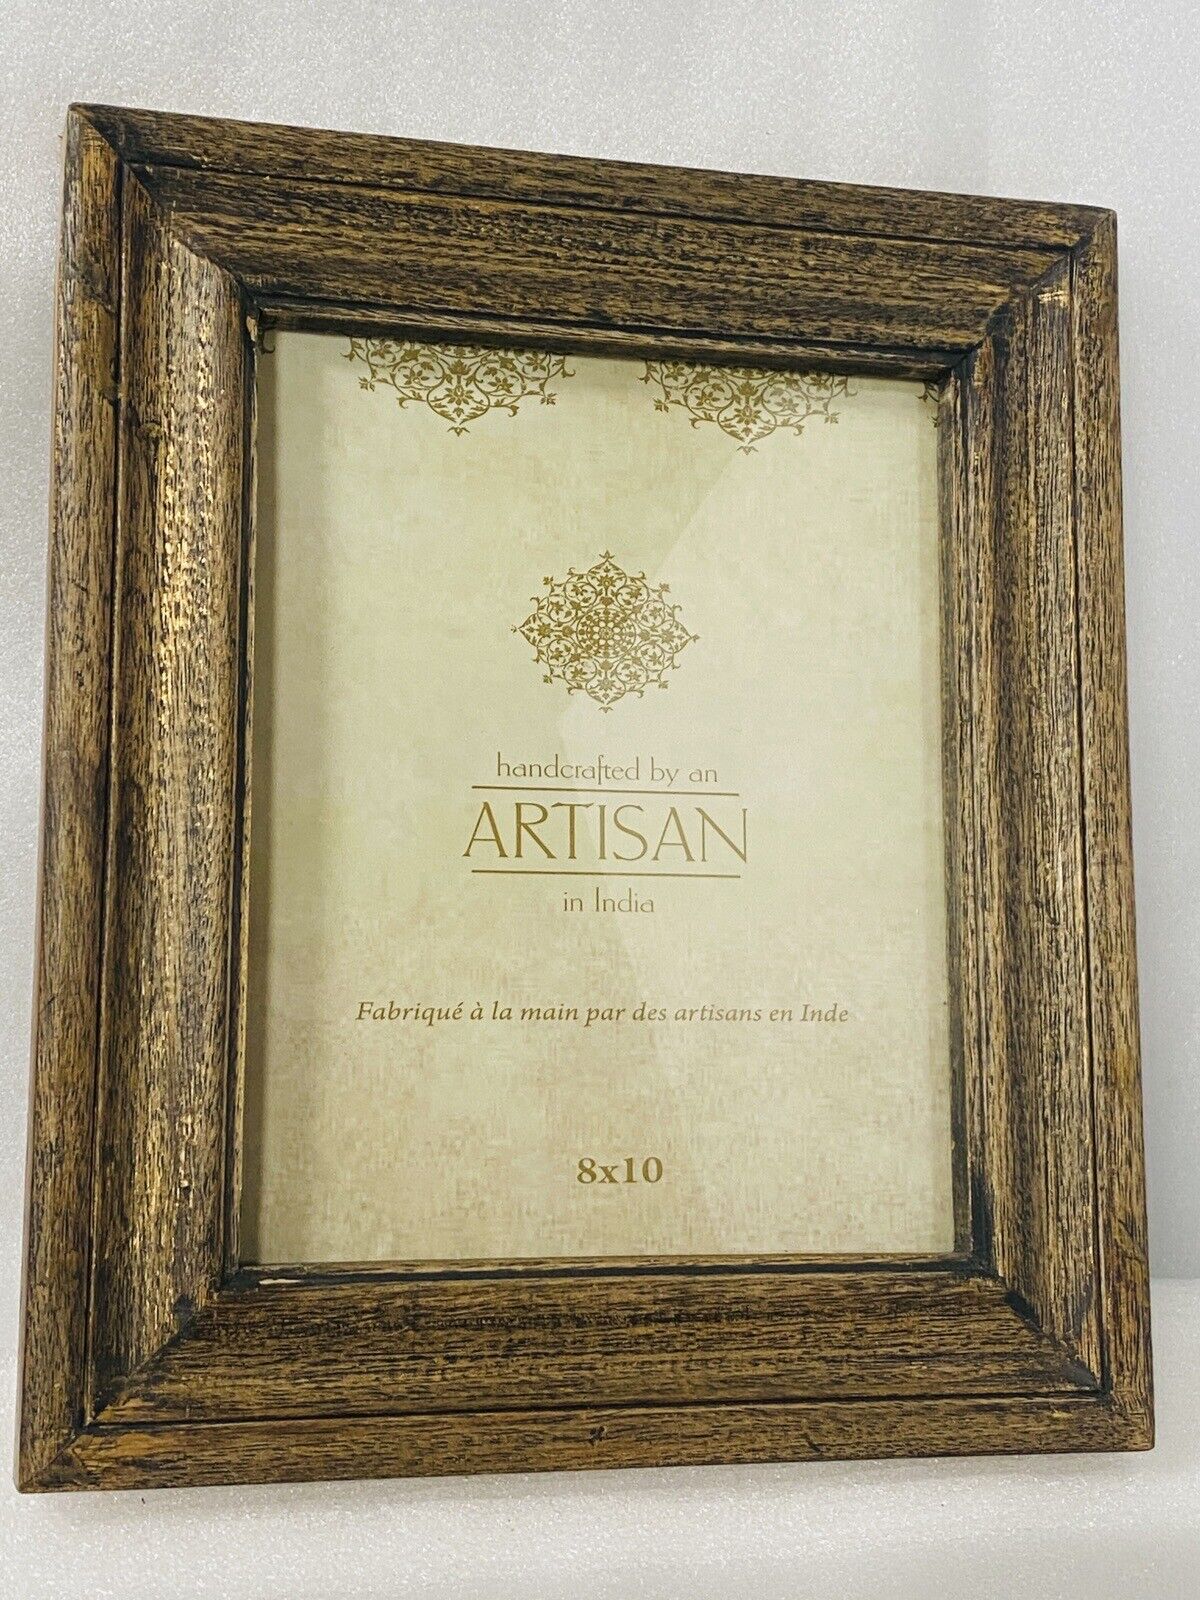 Artisan Brushed Gold Wood Picture Photo Frame 8x10 Handcrafted India